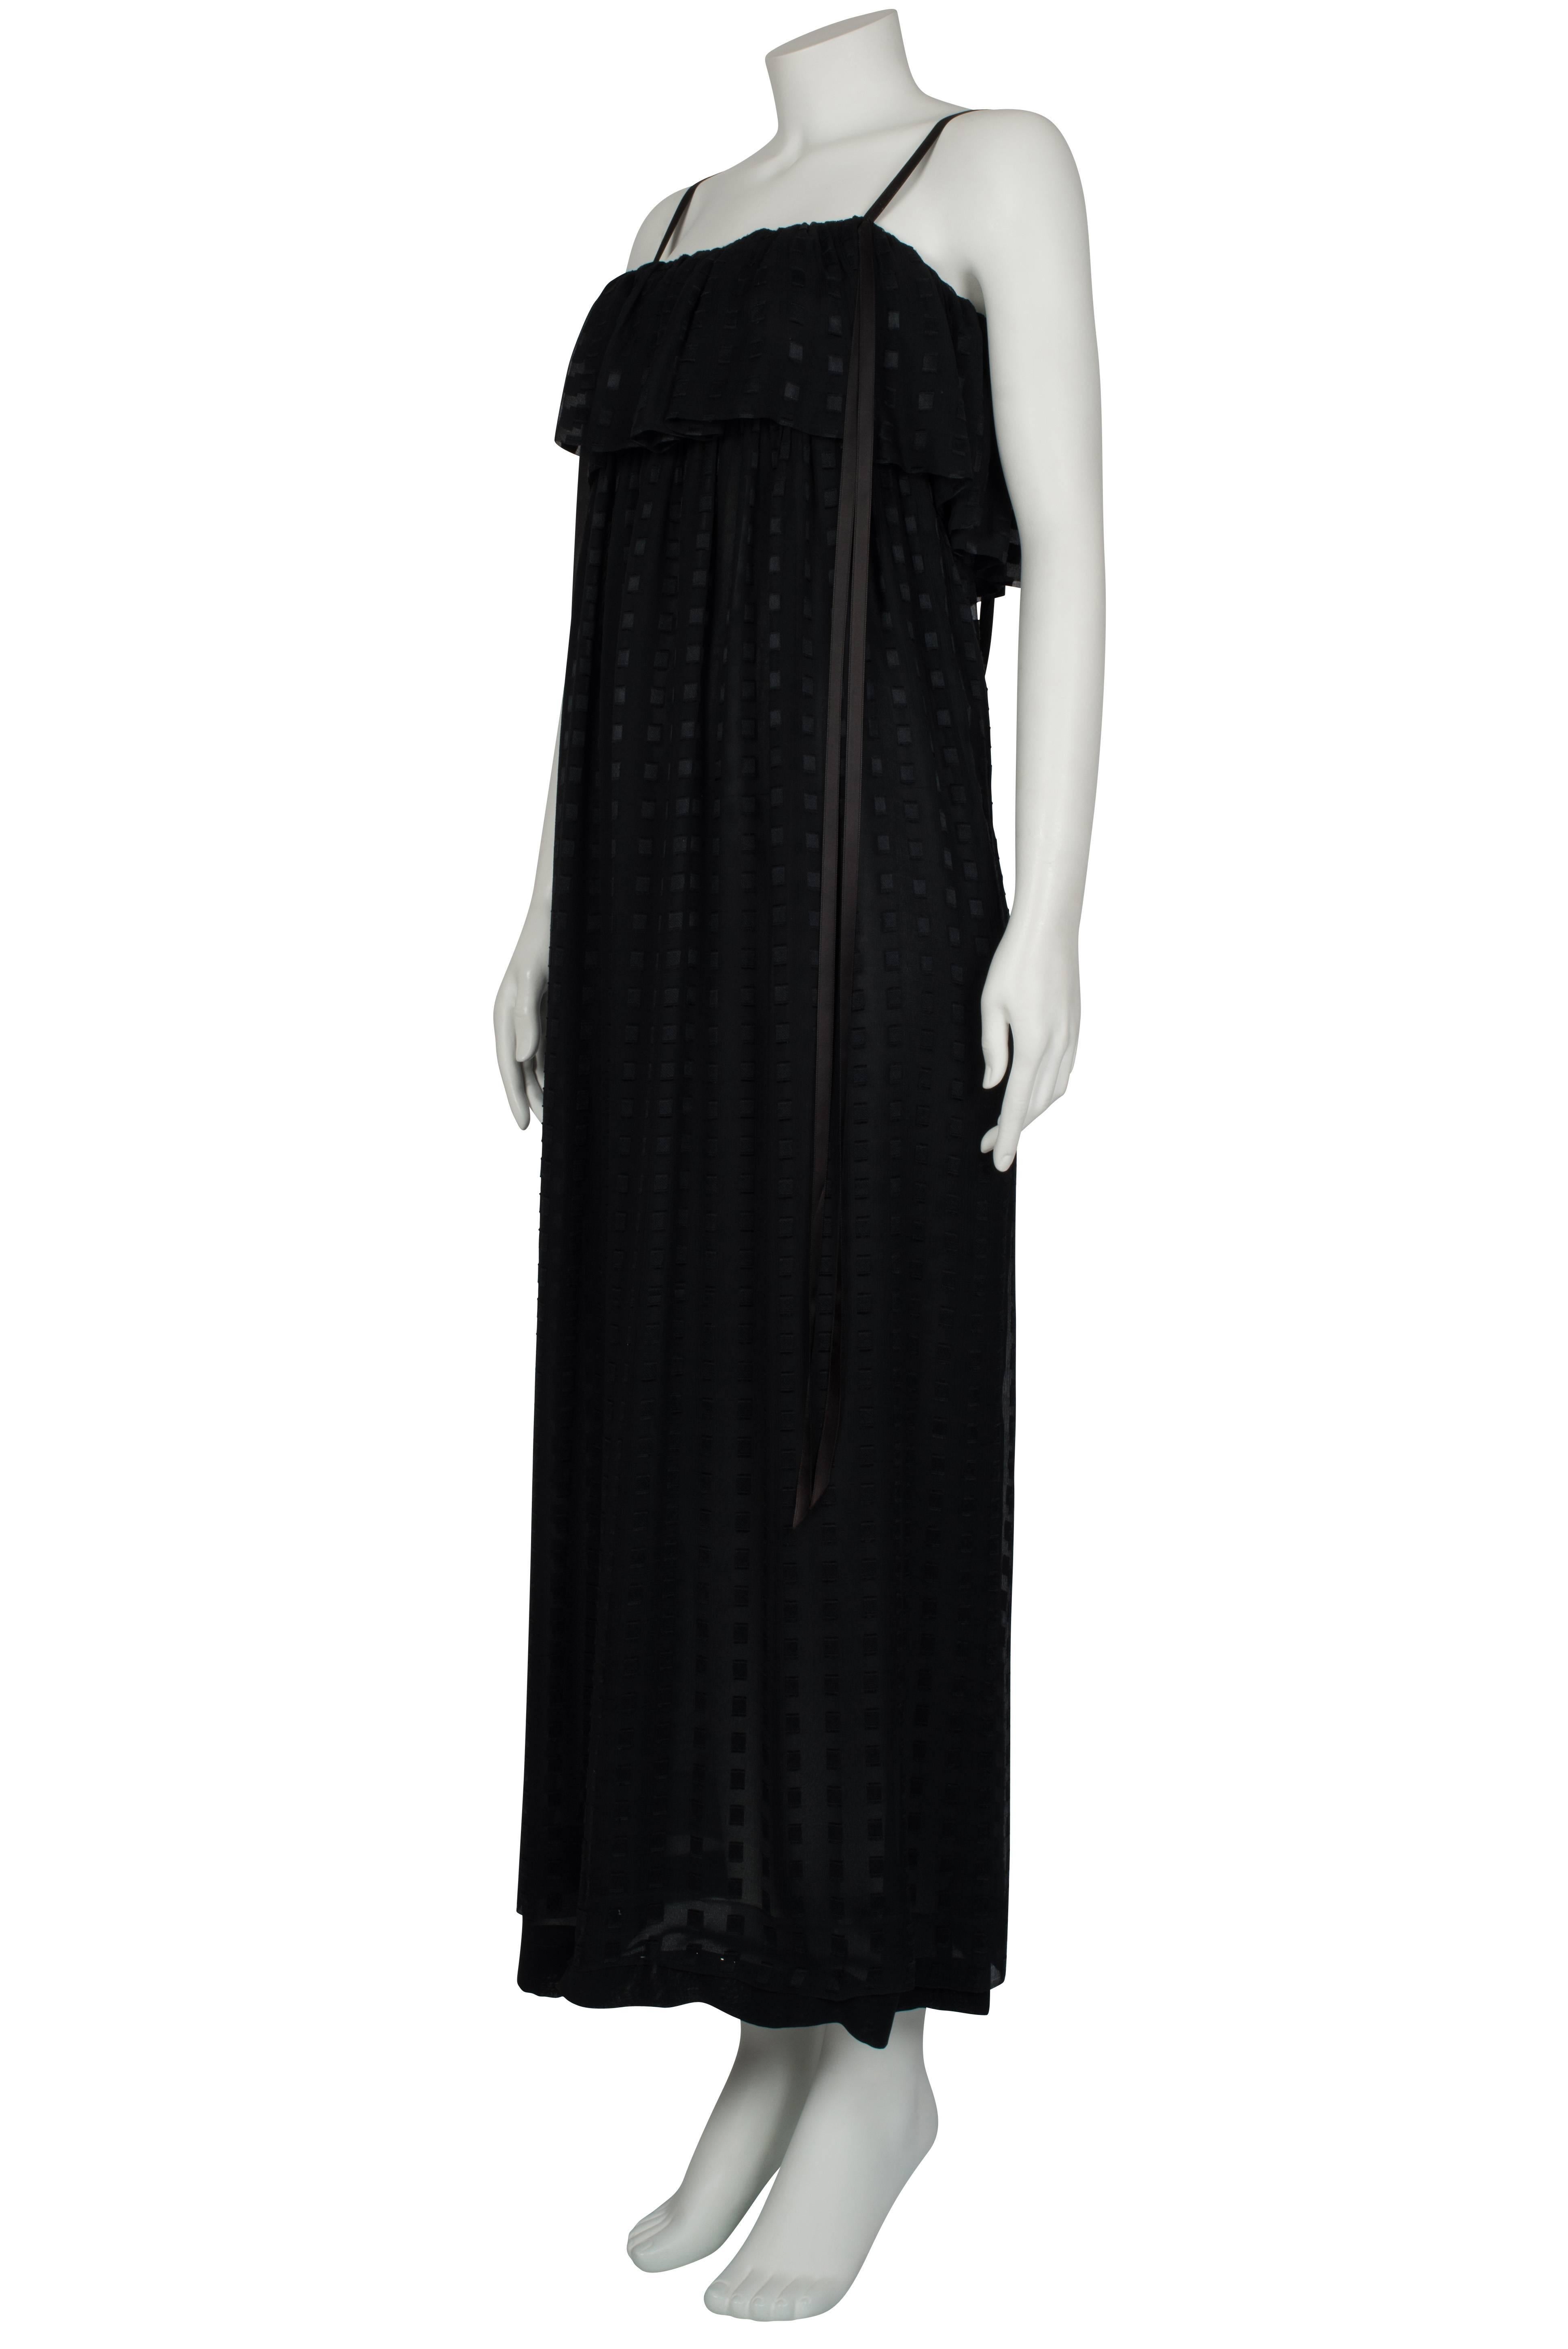 Christian Dior Black Embossed Square Chiffon Gown ca 1980 For Sale 1